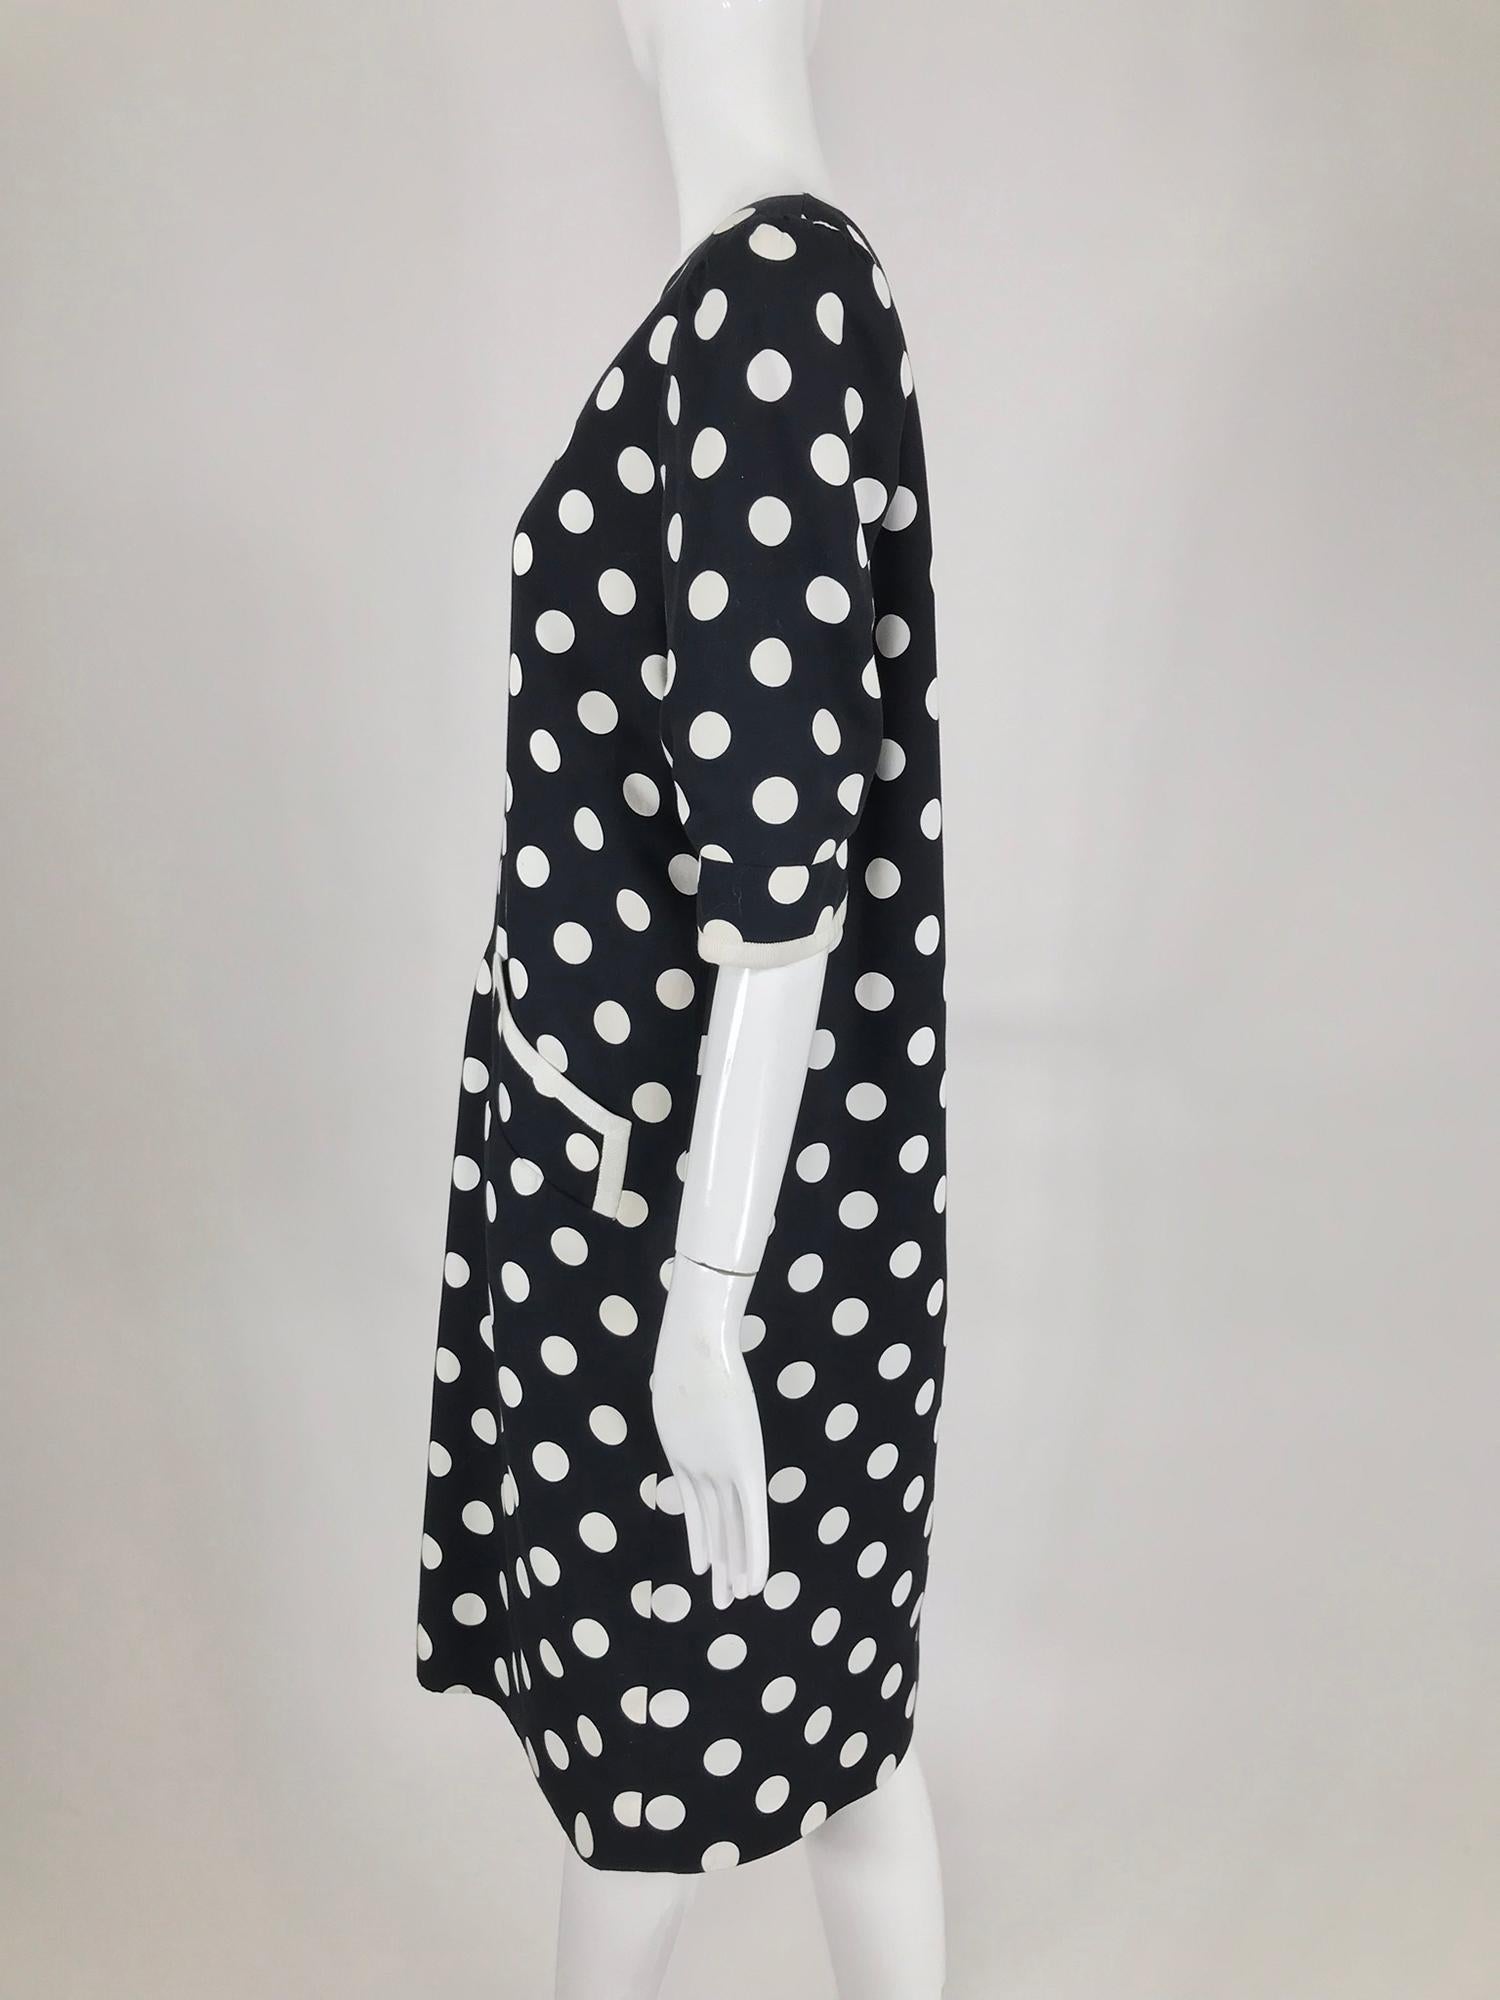 Givenchy Couture Black and White Cotton Polka Dot Day Dress 1980s For Sale 7